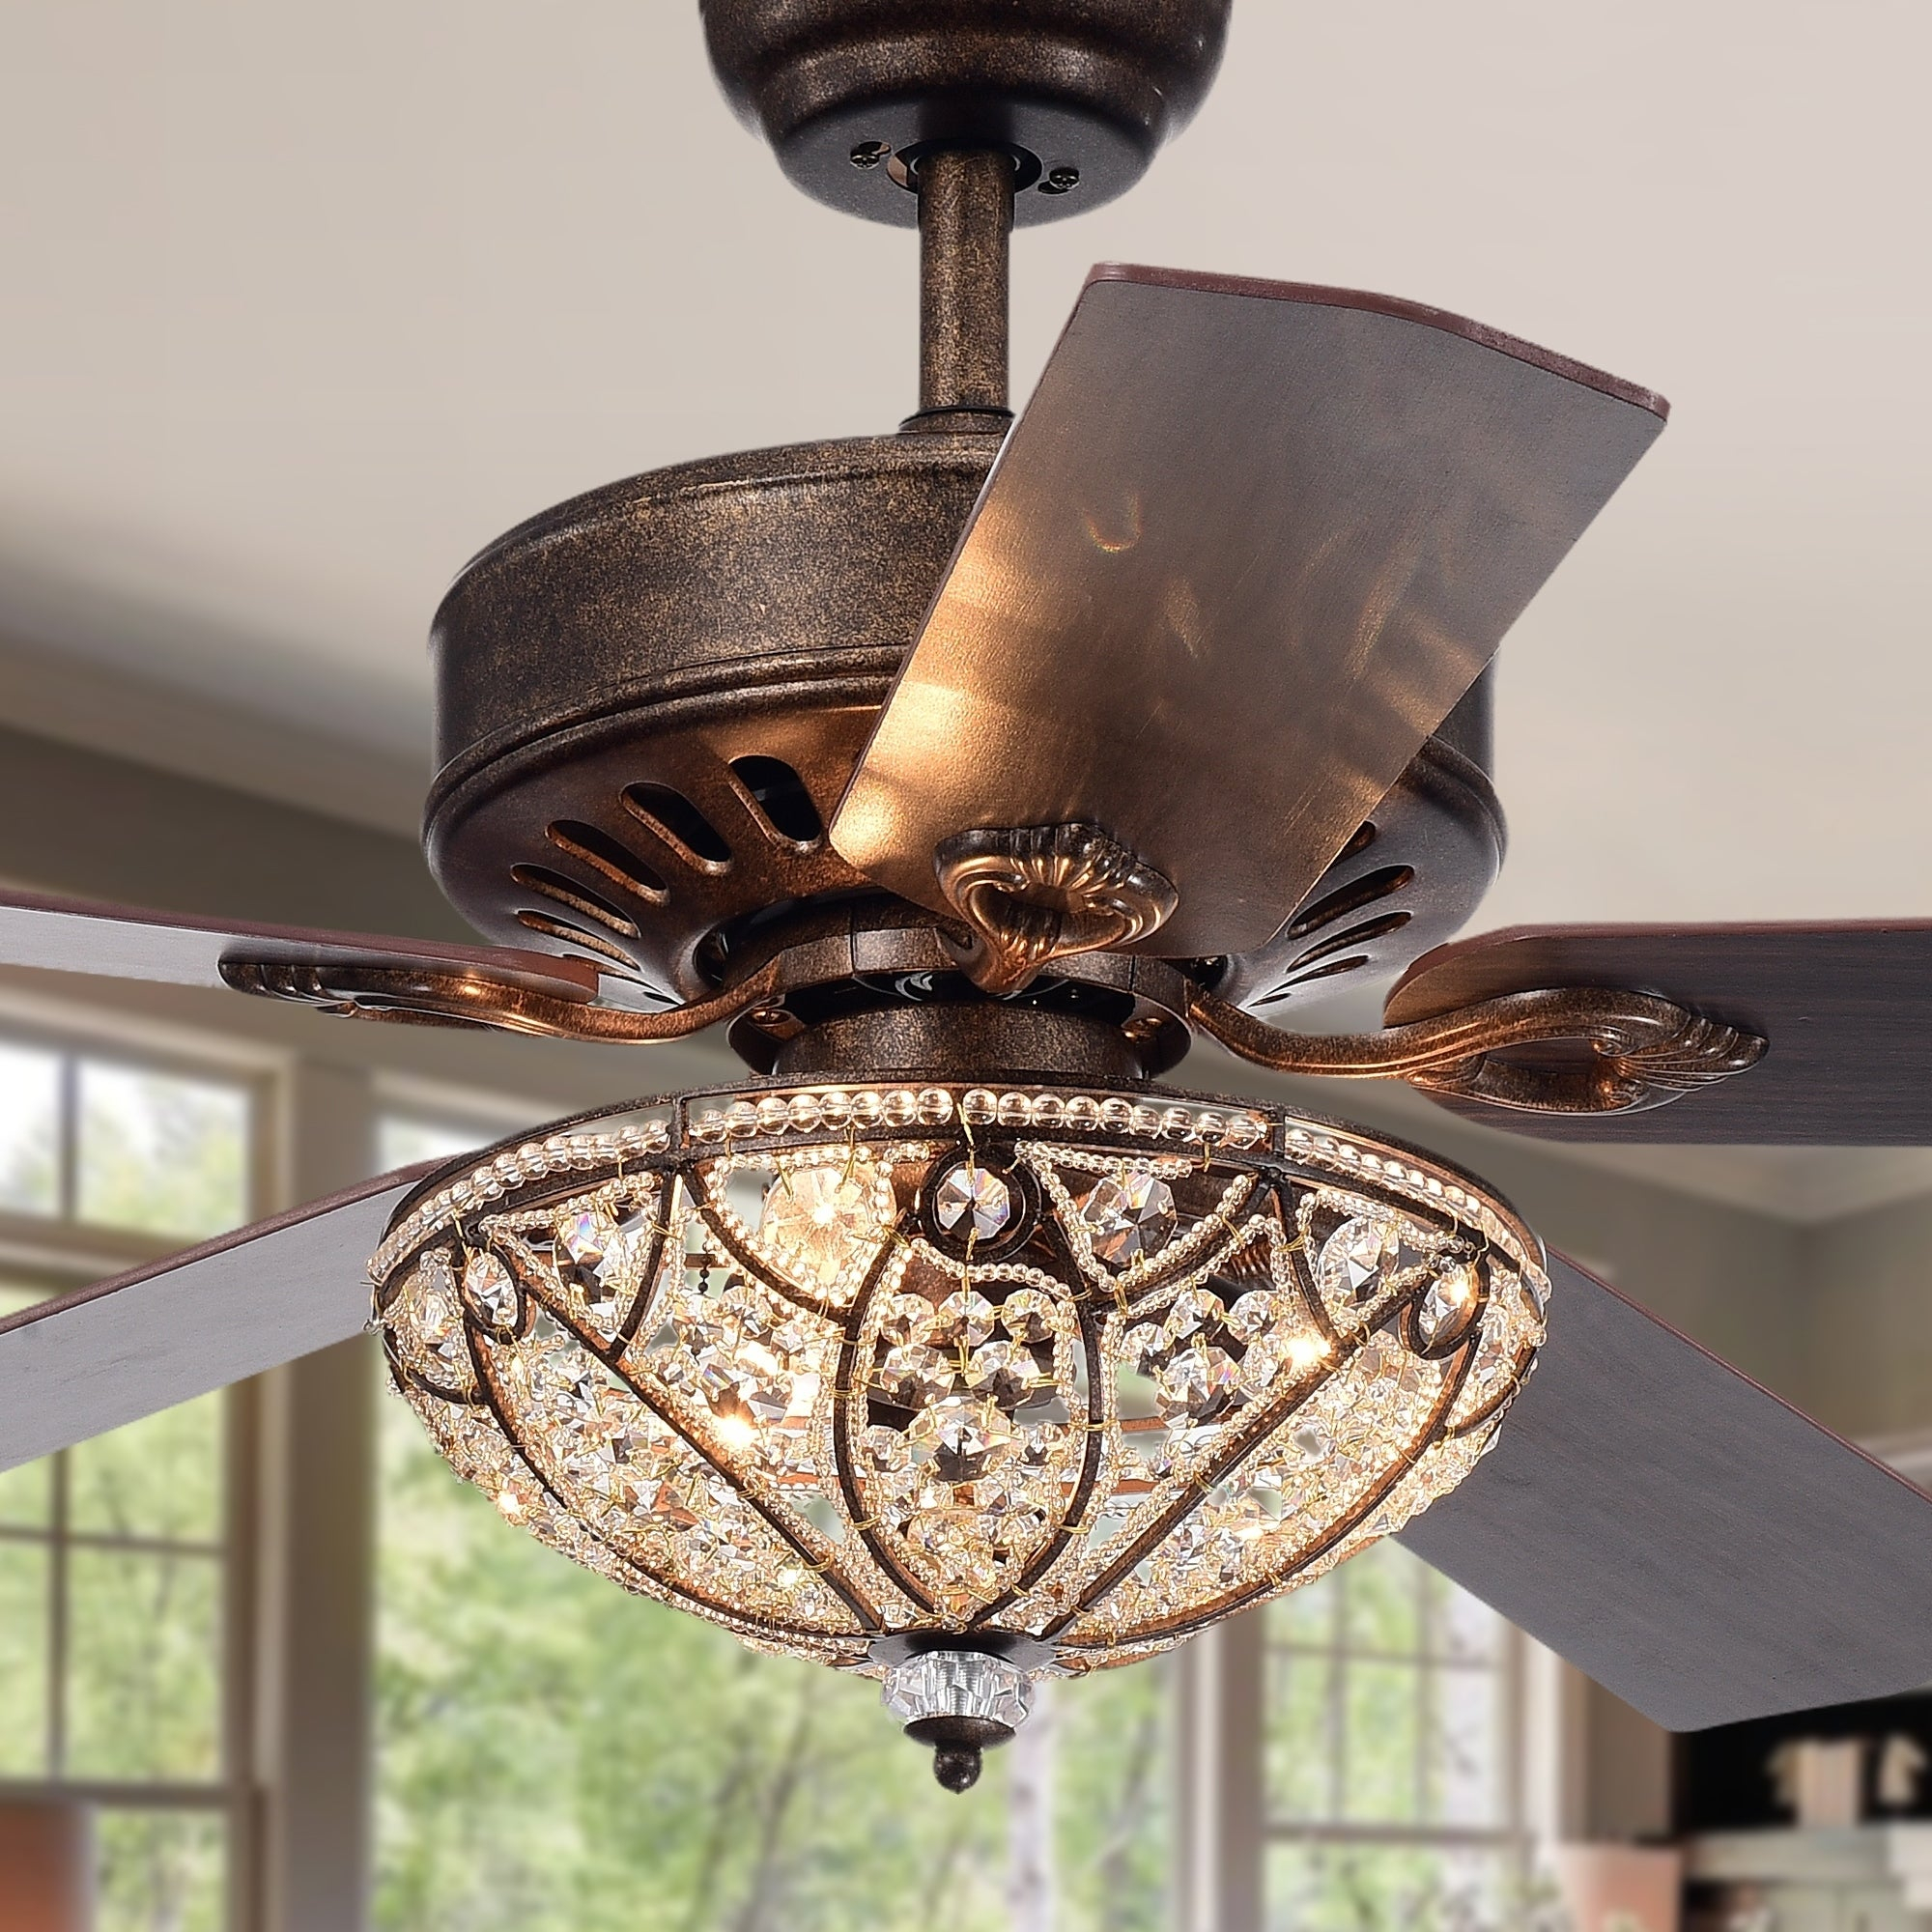 Gliska 52 Inch 5 Blade Rustic Bronze Lighted Ceiling Fans W Crystal Shade Optional Remote Control Incl 2 Color Option Blades for dimensions 2000 X 2000